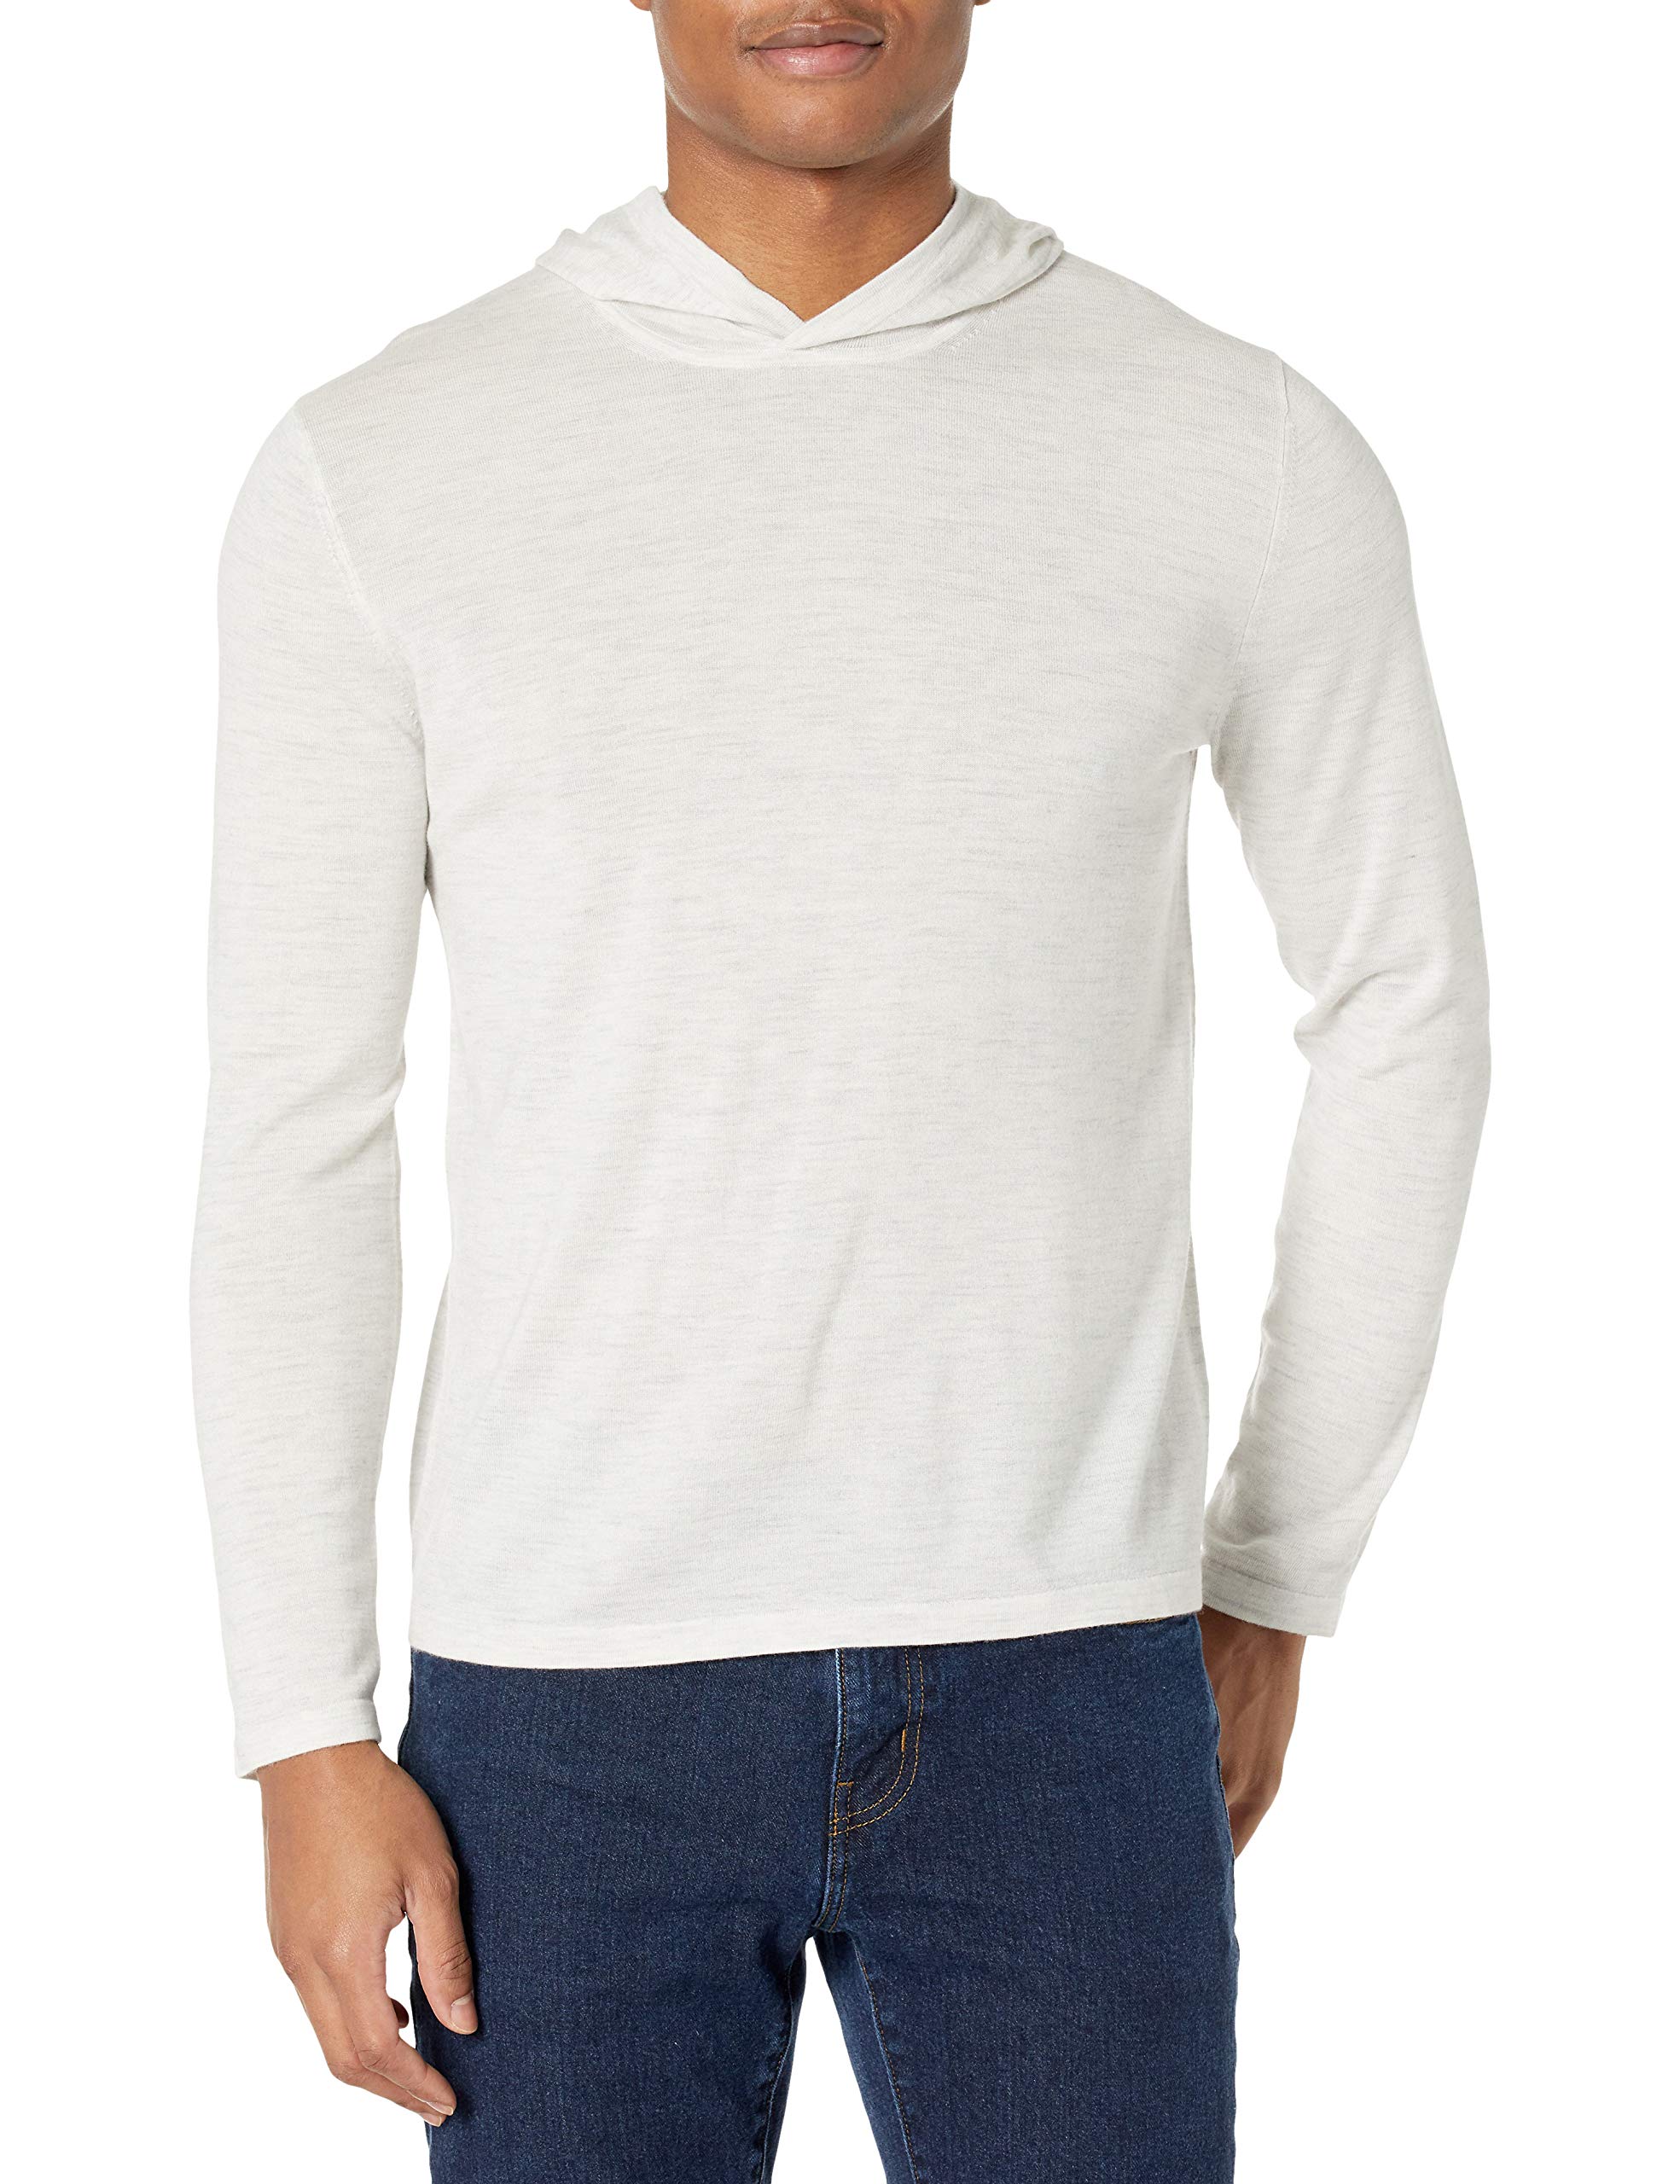 Vince Men's Long Sleeve Pullover Cashmere Hoodie, Heather White, Large